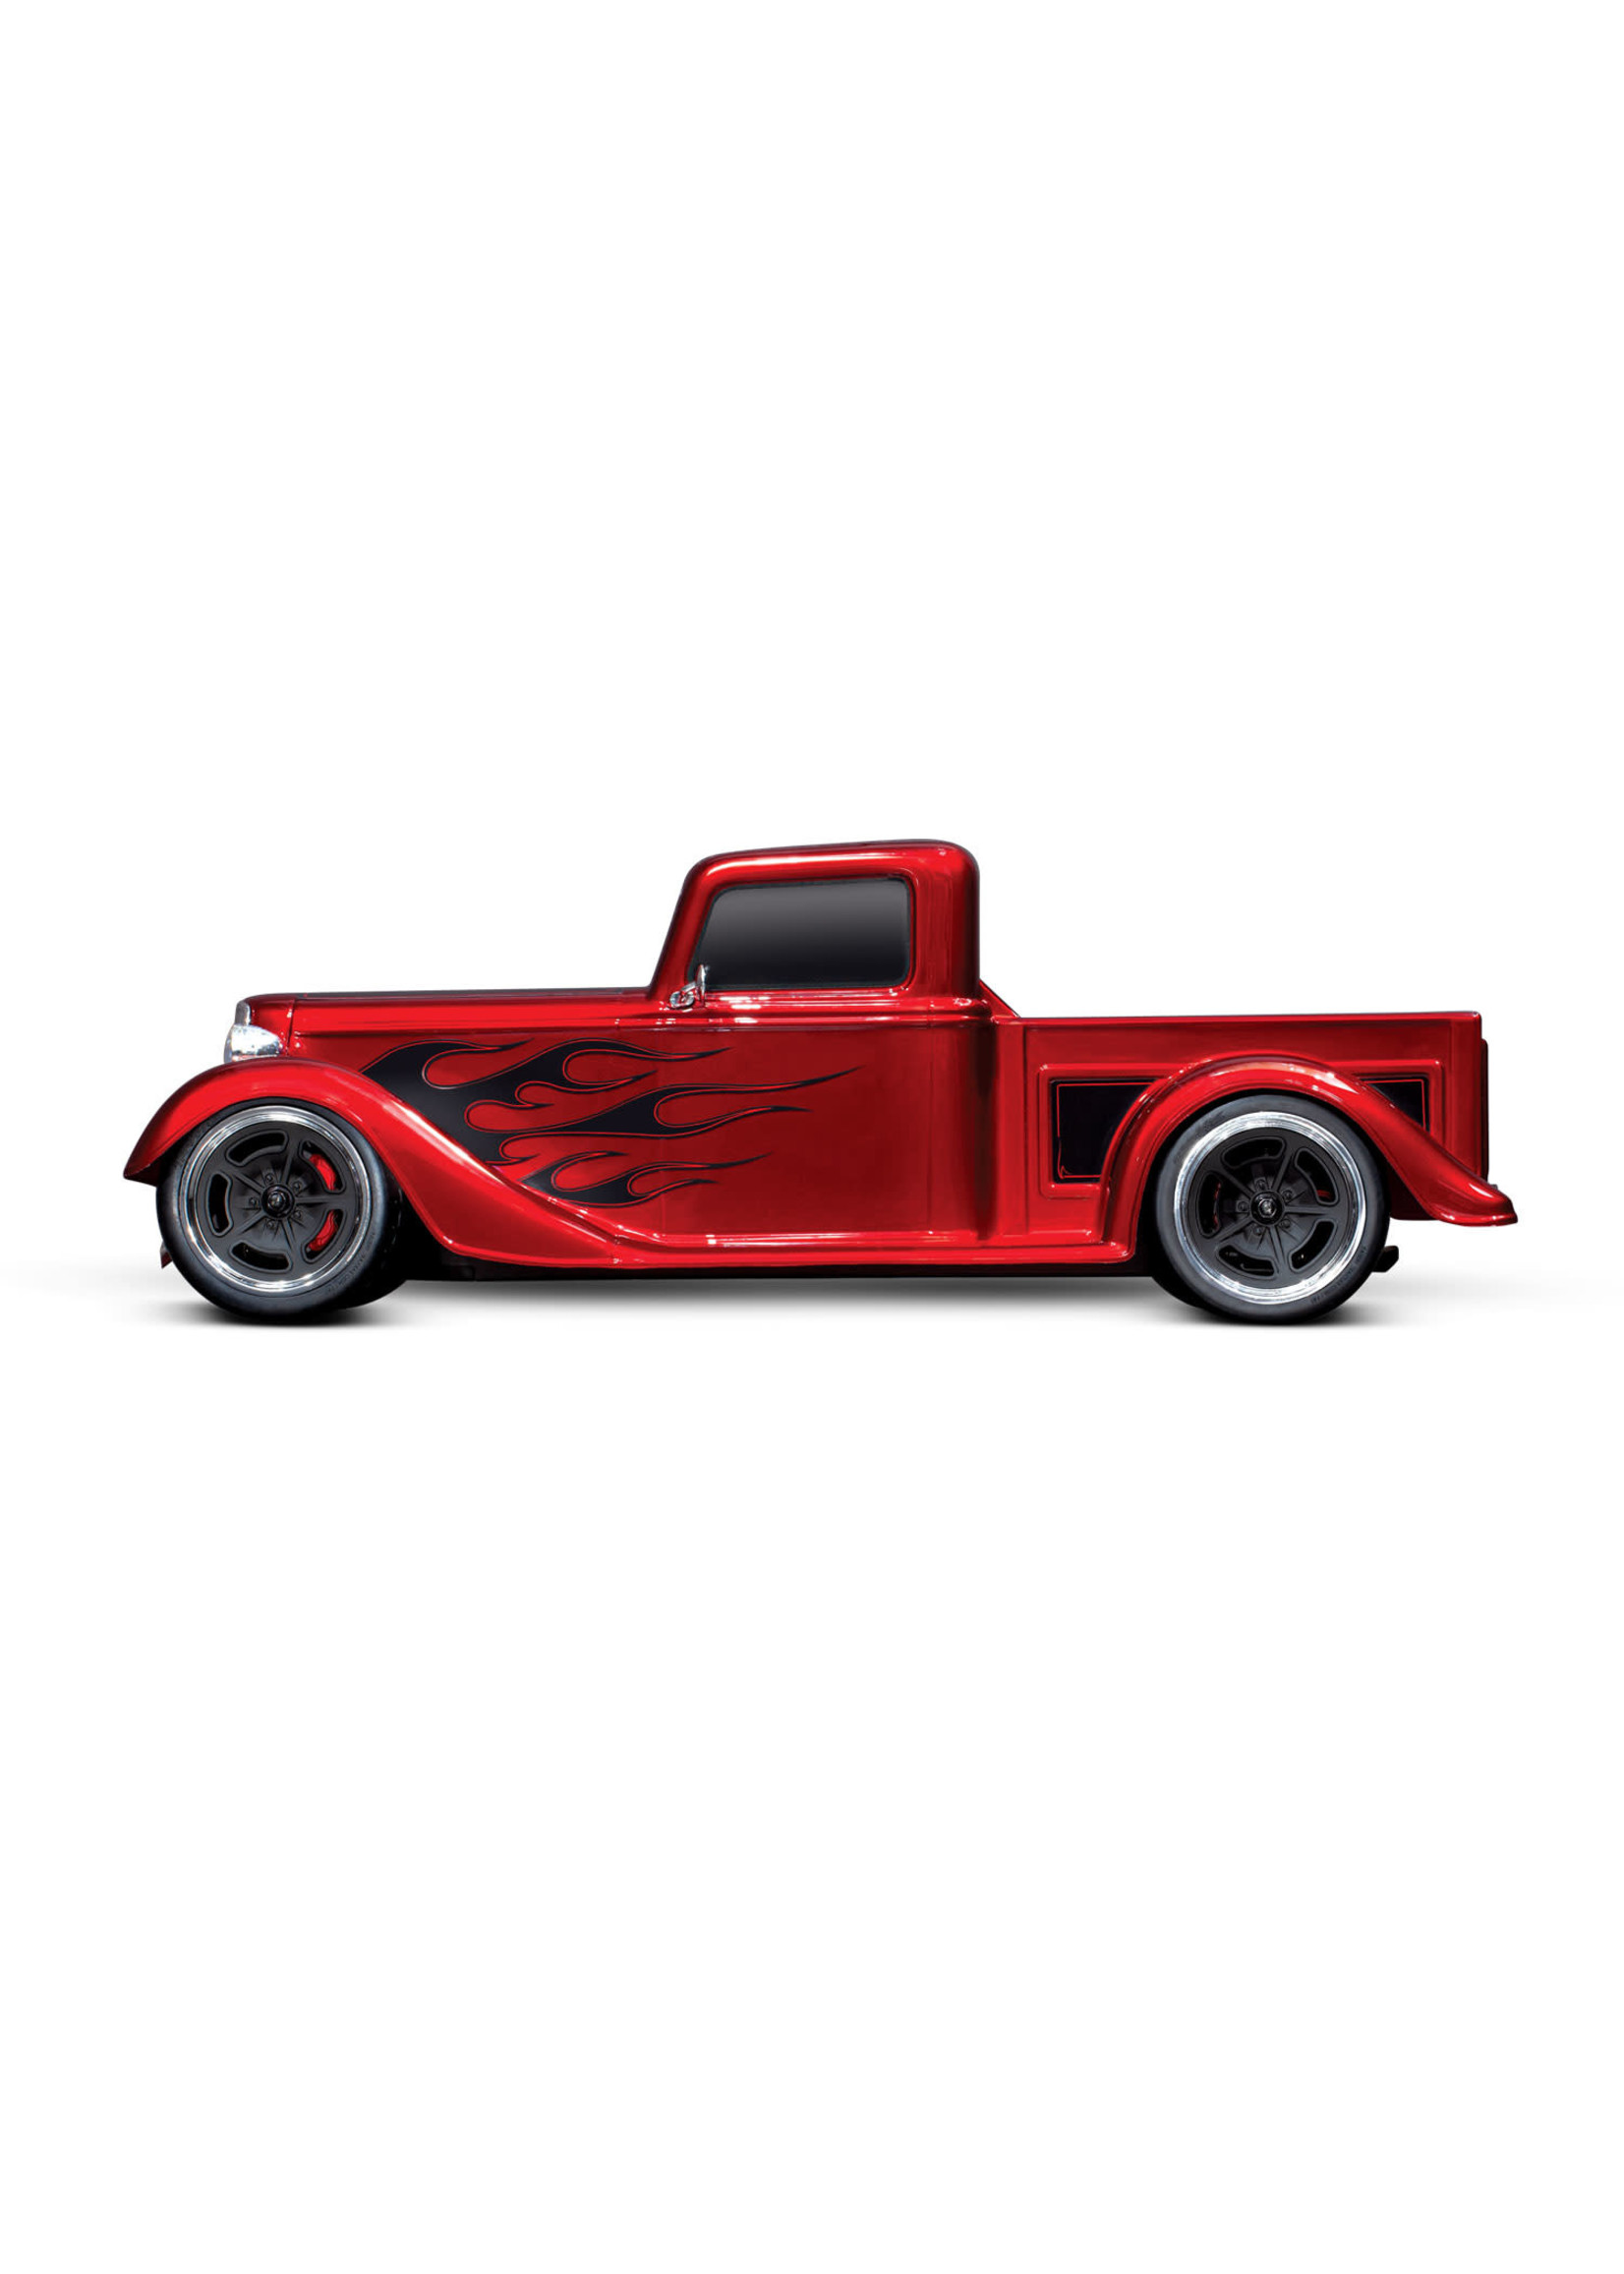 Traxxas TRA93034-4 Traxxas Factory Five '35 Hot Rod Truck; Fully assembled, RTR, w/ TQ 2.4GHz Radio, XL-5 ESC, Titan 12T 550 motor, and ProGraphix painted replica body